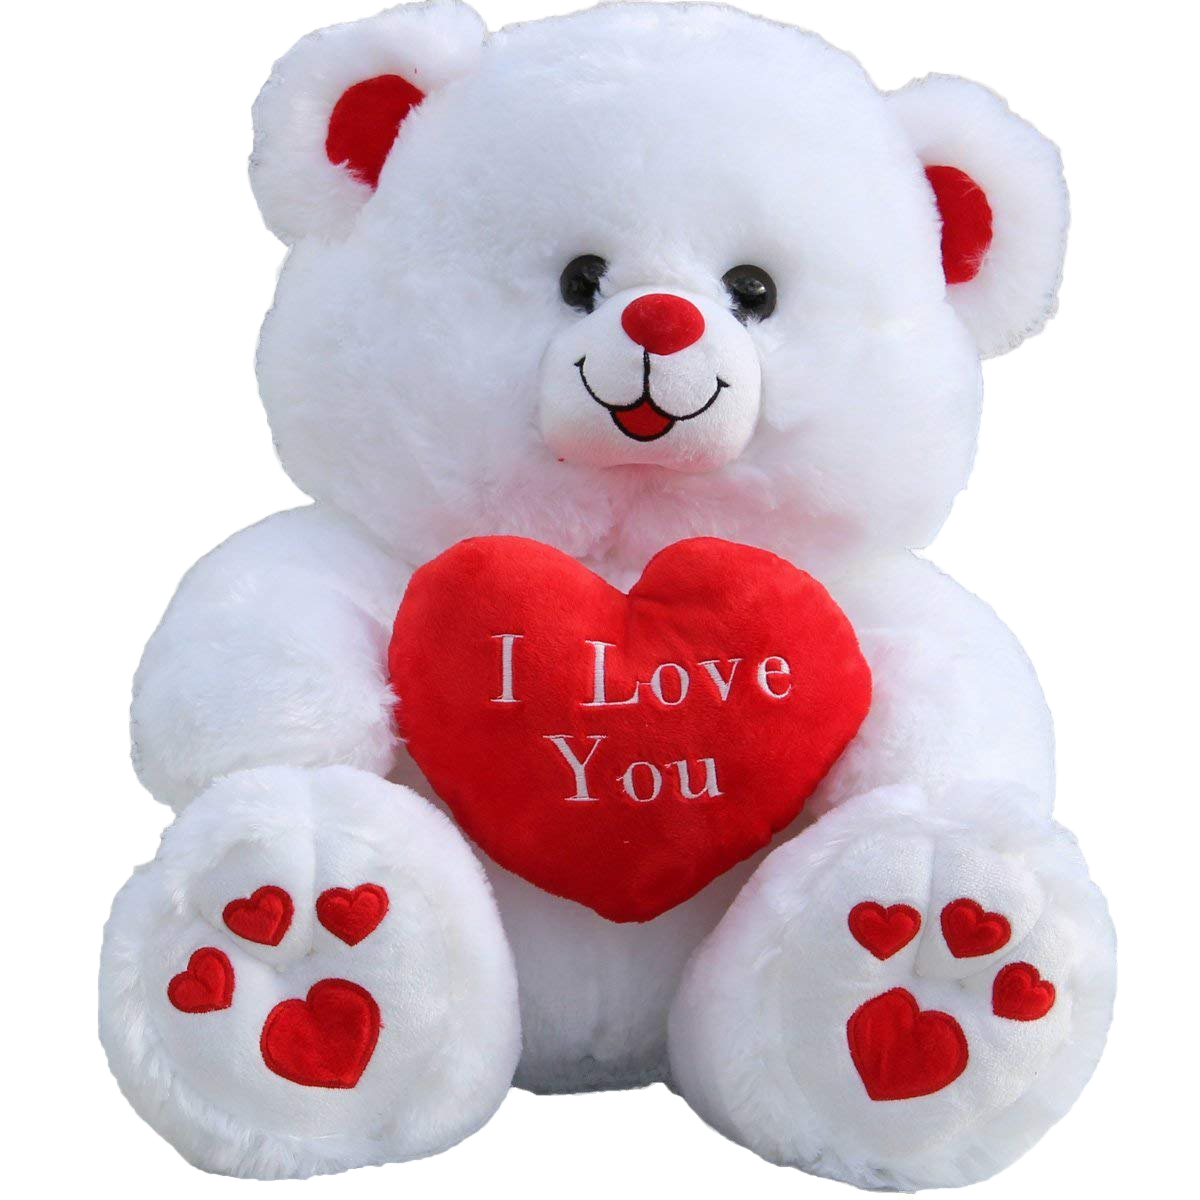 Outstanding Compilation of 999+ Love Teddy Day Images in Full 4K Resolution